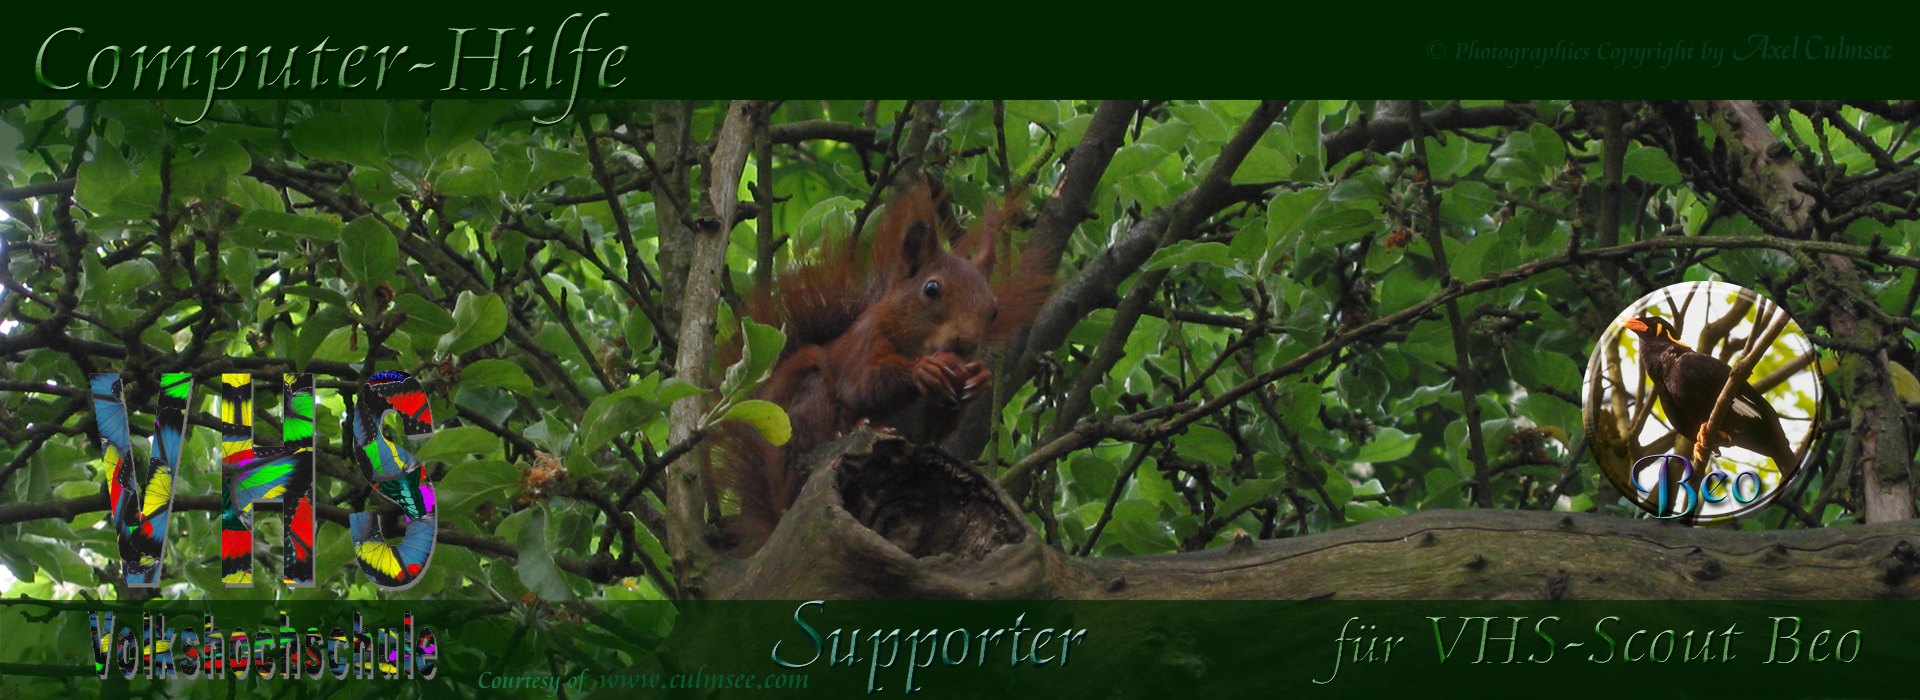 Supporter squirrel for Scout Beo